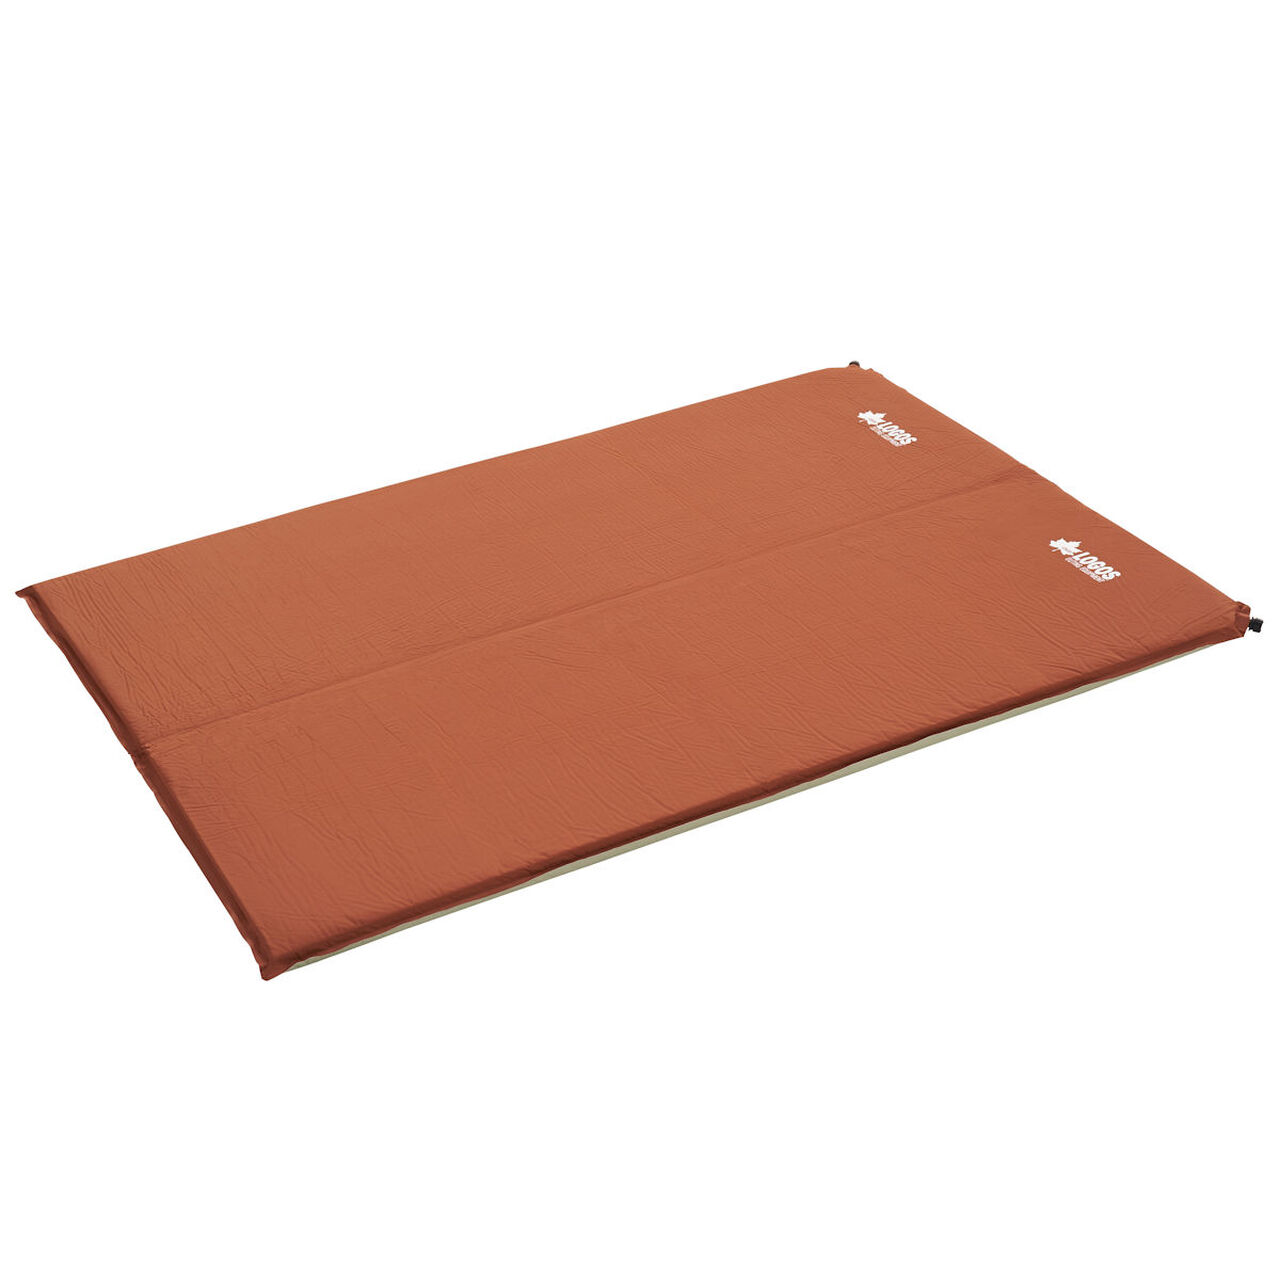 (High Density Foam) 55 Compact Self-inflating Mat - DUO,, large image number 3